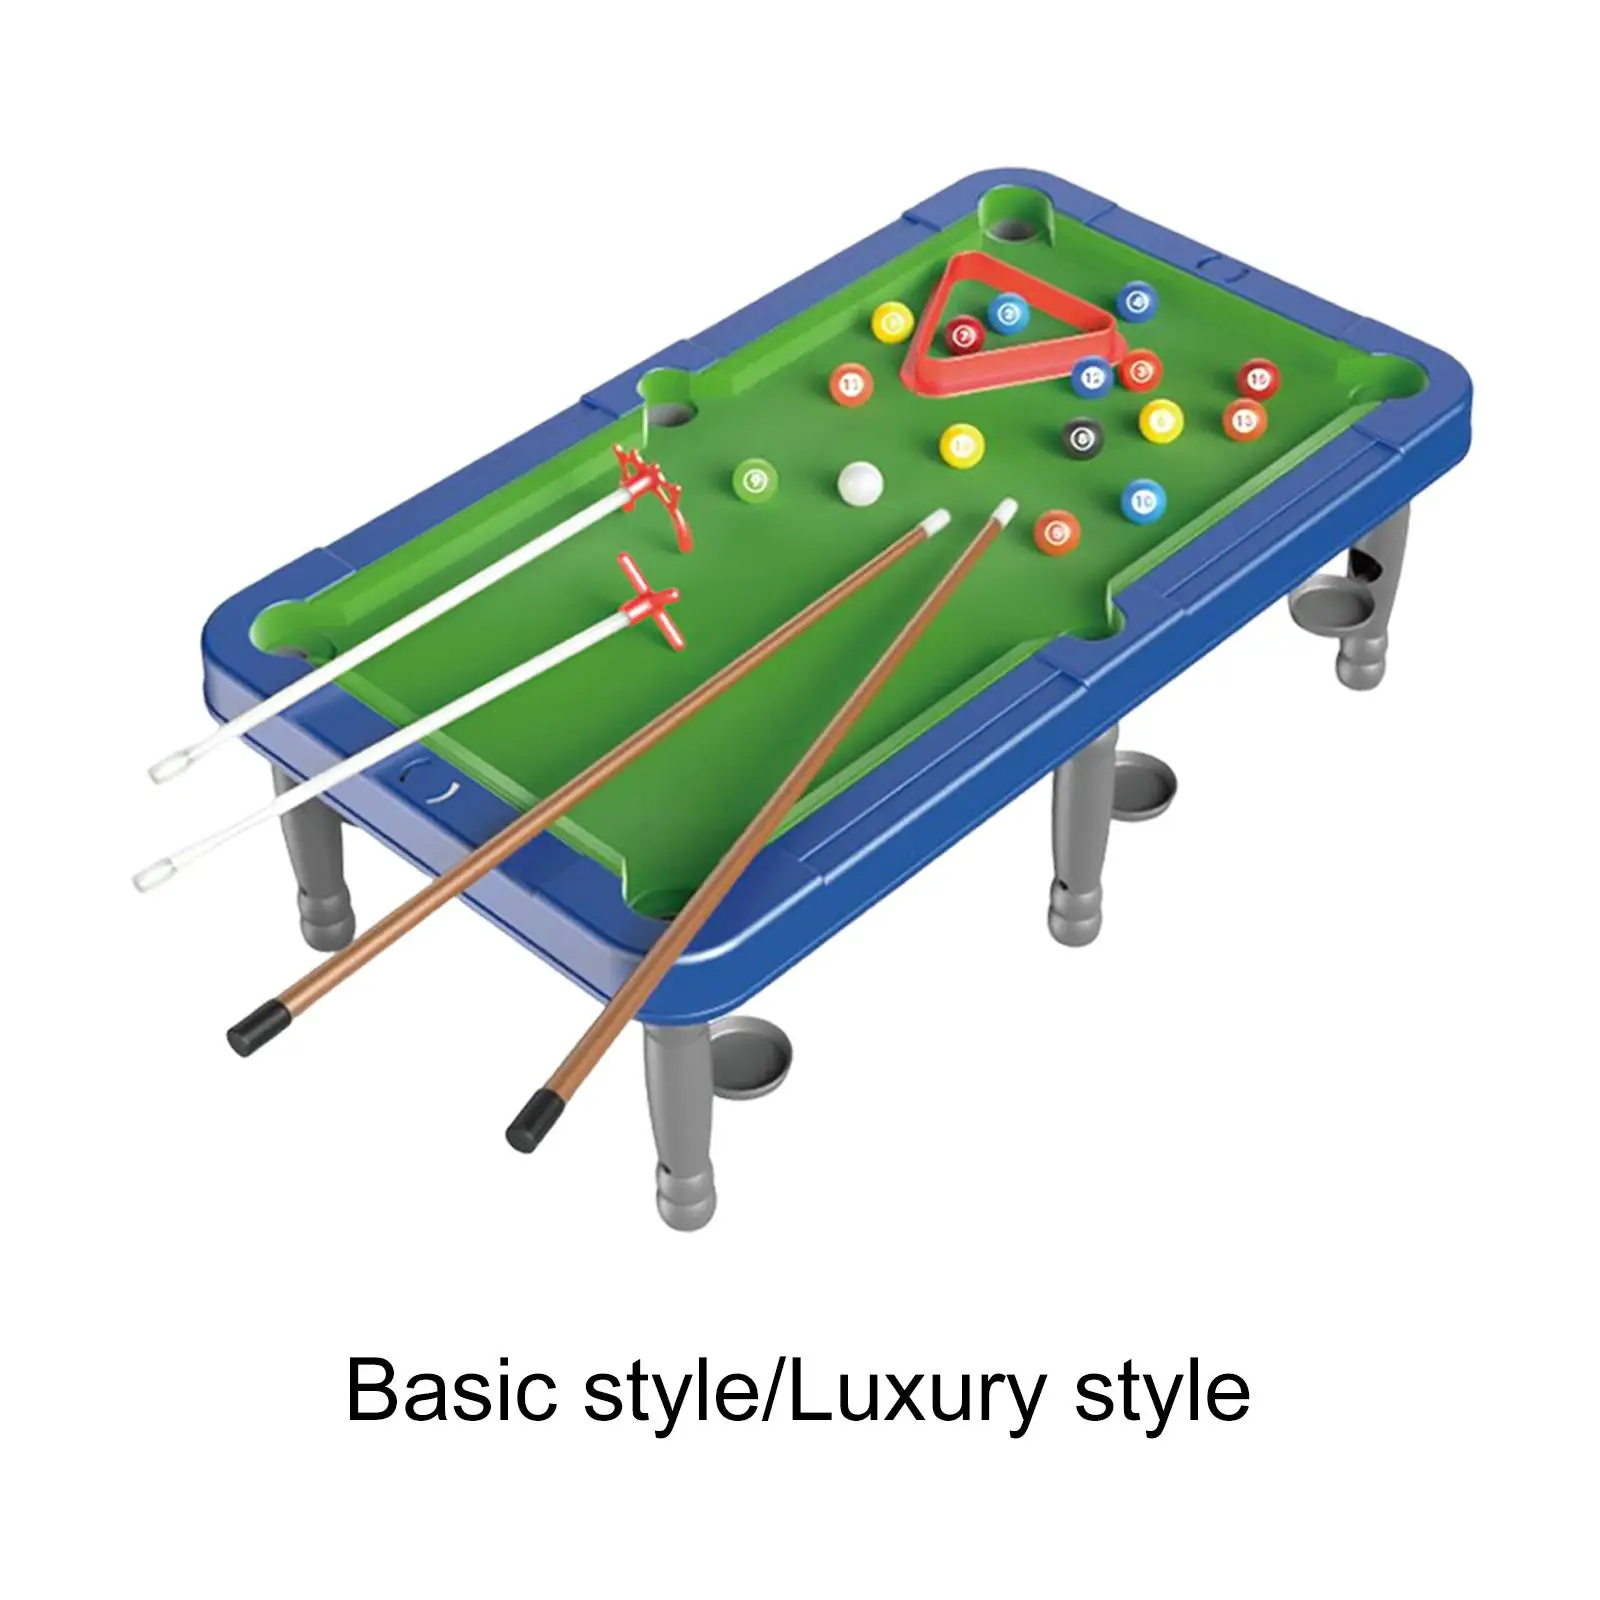 Portable Tabletop Billiards Home Use Chalk, Racking Triangle Indoor Game Toy Billiard Cues Pool Table Set for Children Family